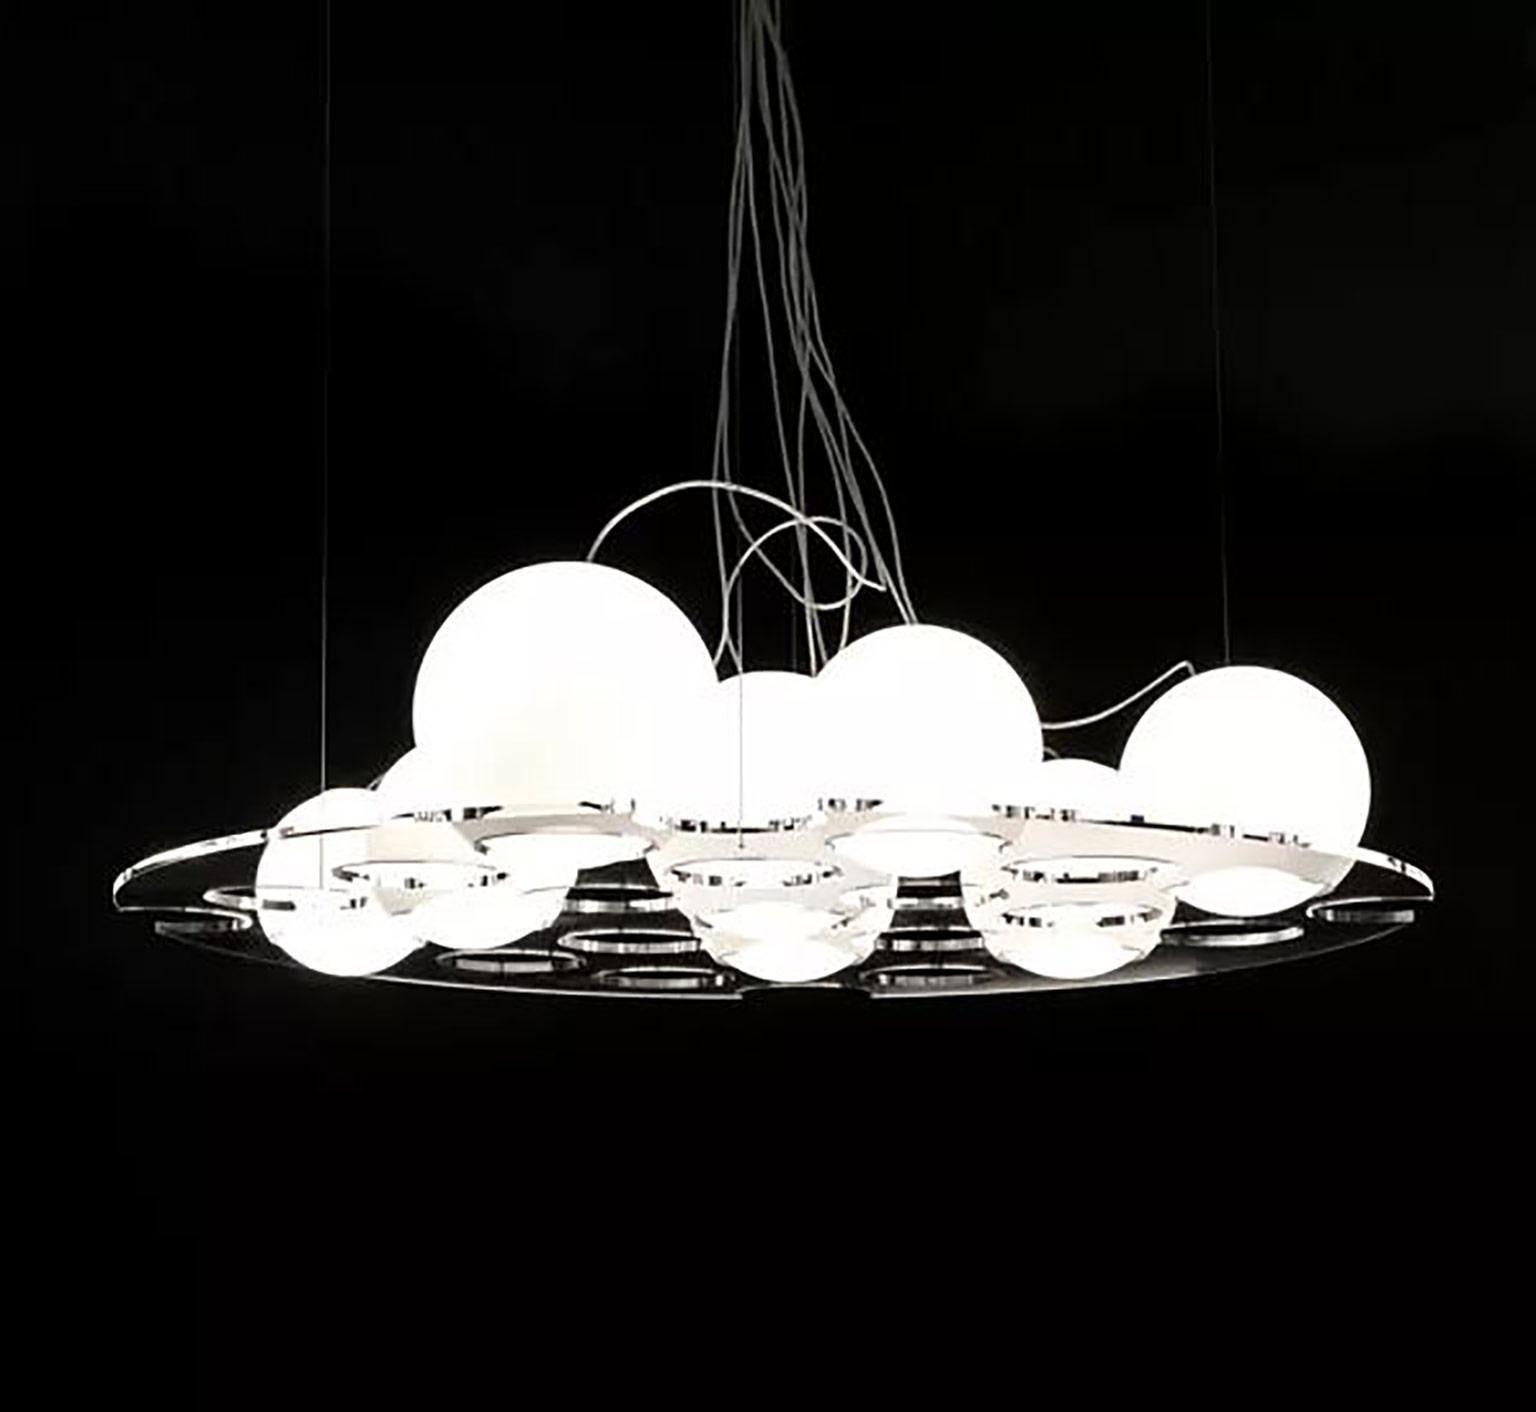 The plateau suspension lamp by Antonia Astori & Nicola De Ponti for Oluce. This truly unique and customizable lamp uses a plateau in transparent laser-finished and polished PMMA with a variety of holes that allow you to position the multiple glass